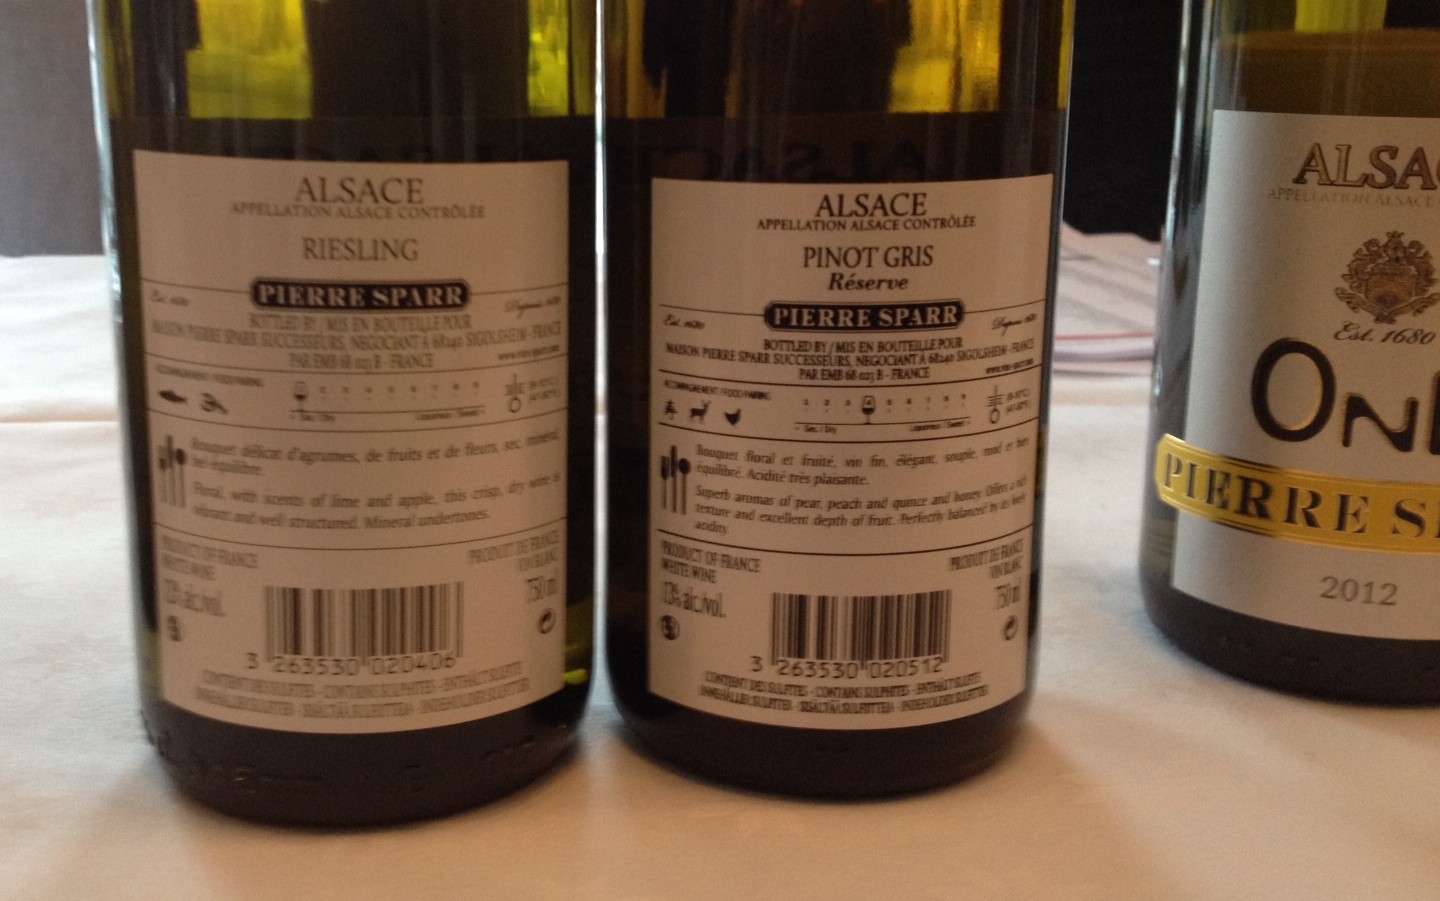 Pierre Sparr – an Alsace producer with a fruity style and a